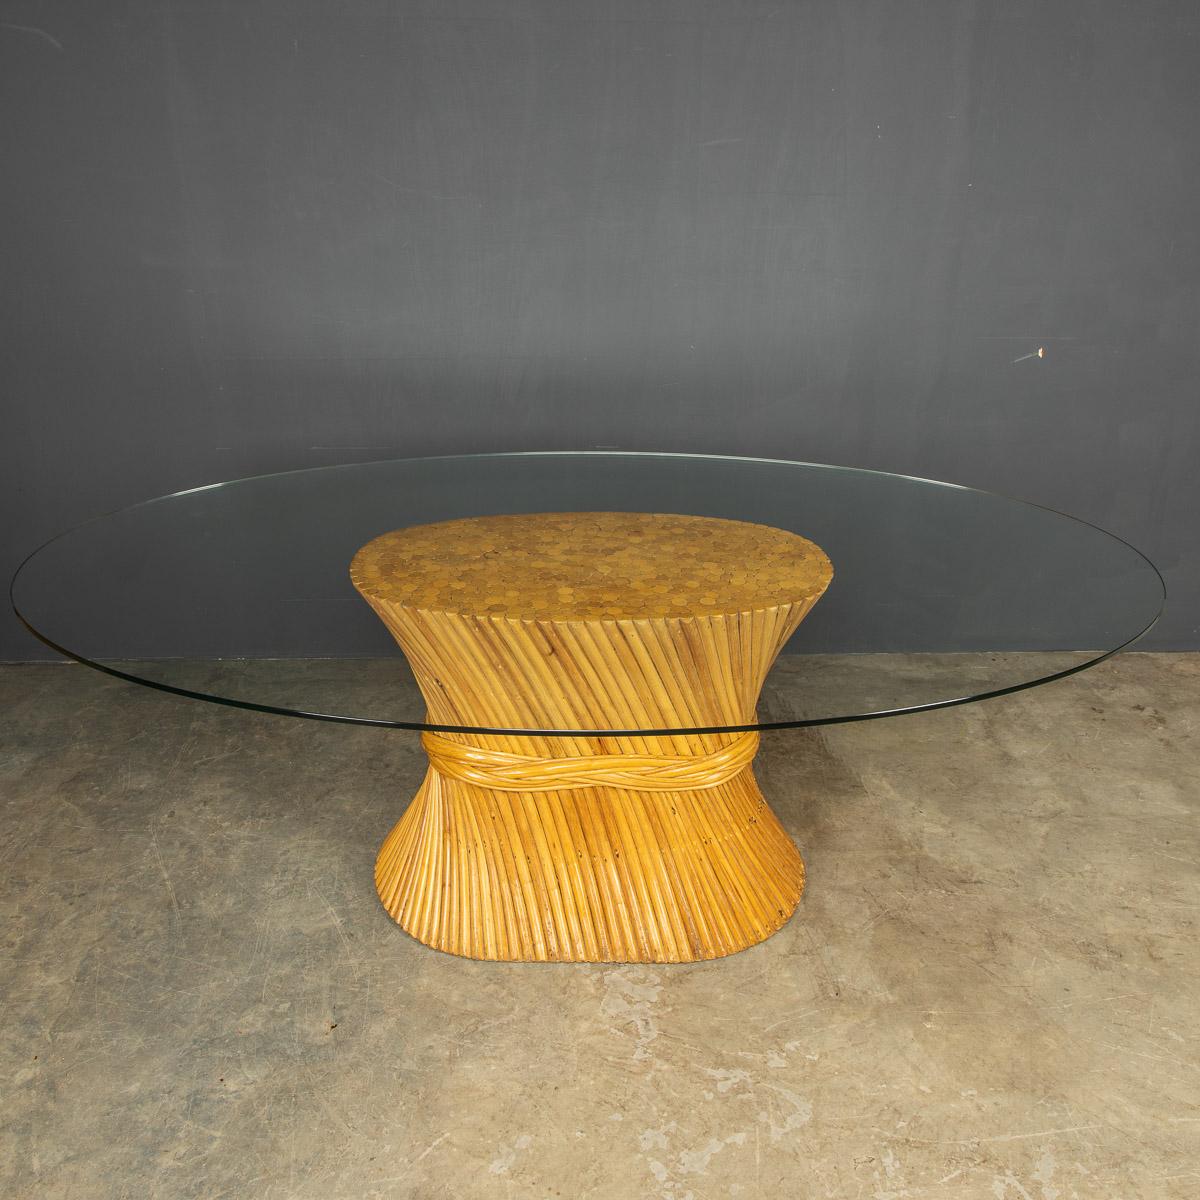 A large iconic wheat sheaf dining table with an oval glass top and bamboo pedestal by American designer McGuire, circa 1970. This piece will seat six comfortably.

CONDITION
In Good Condition - wear consistent with age, only minor wear and tear.